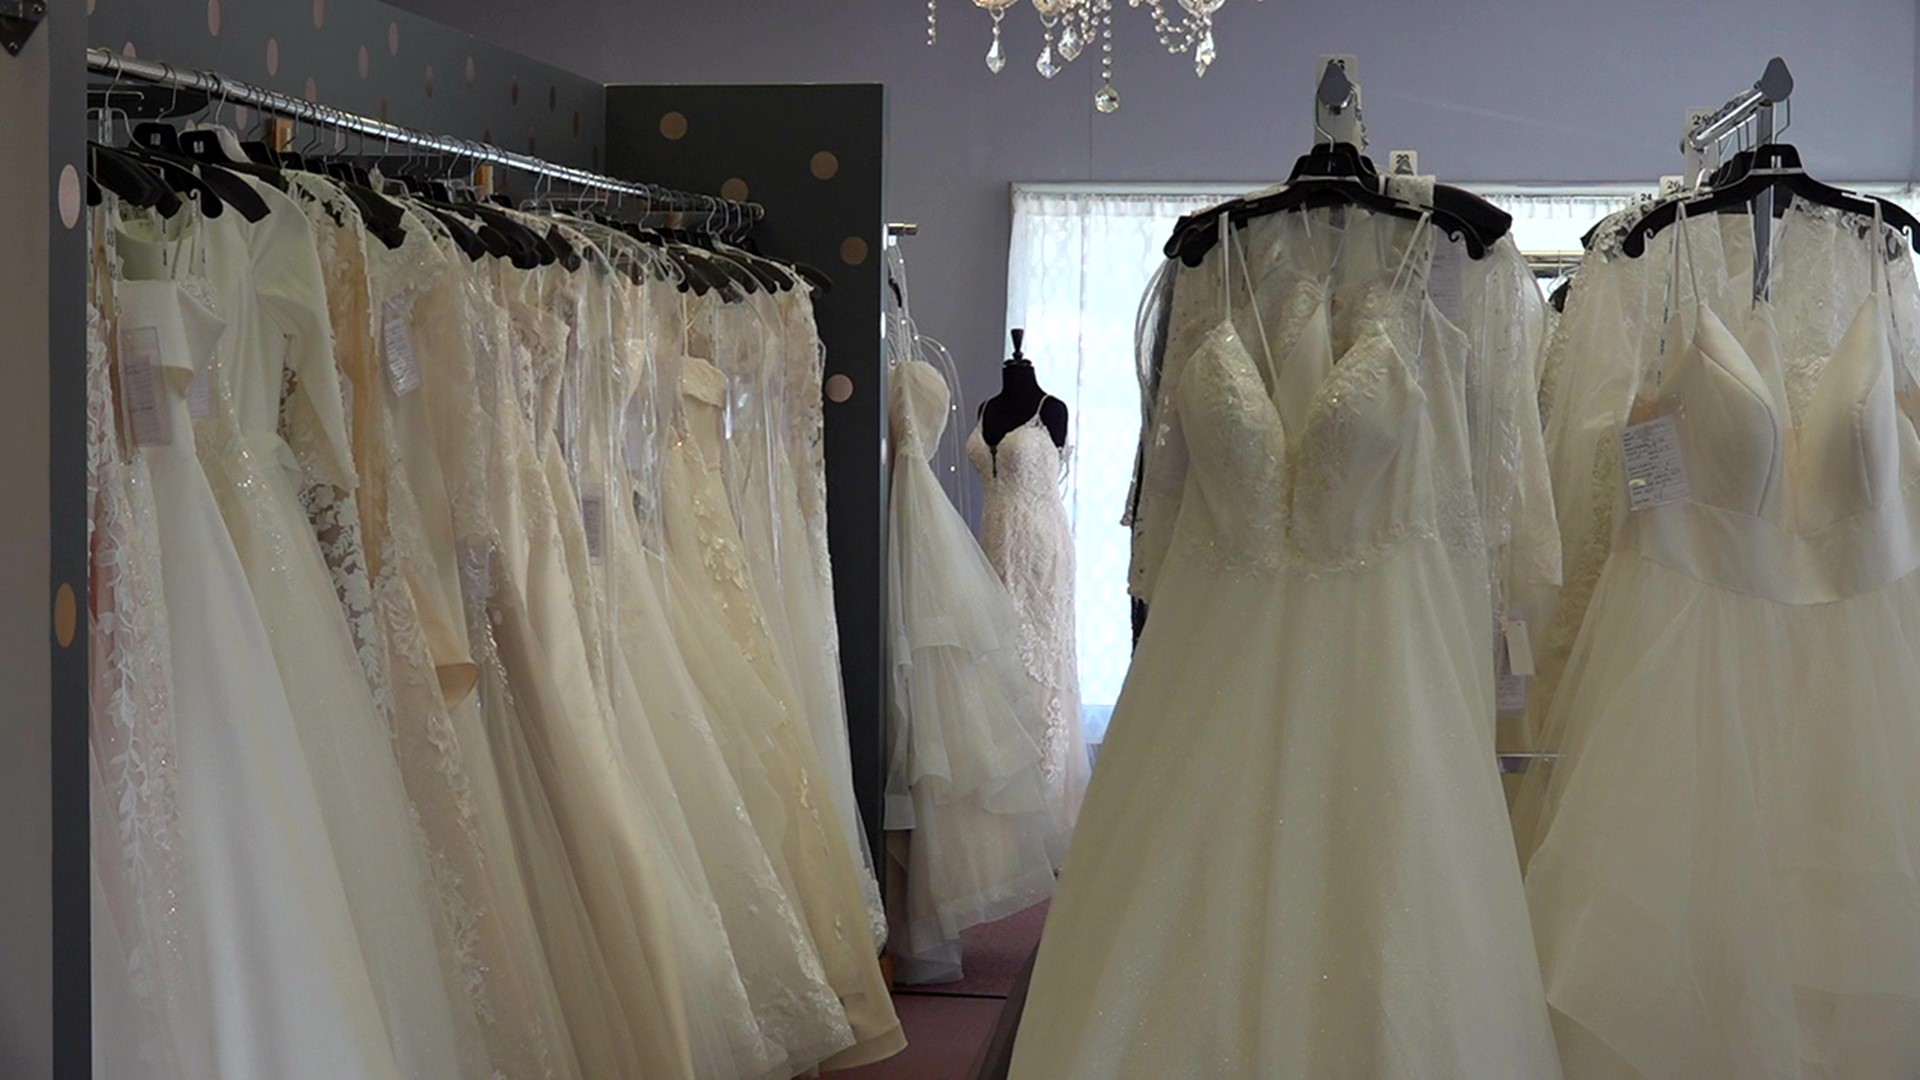 Instead of closing a bridal store in Schuylkill County, the owner is looking for her replacement, hoping to pass her 30-year-old business on to the next generation.